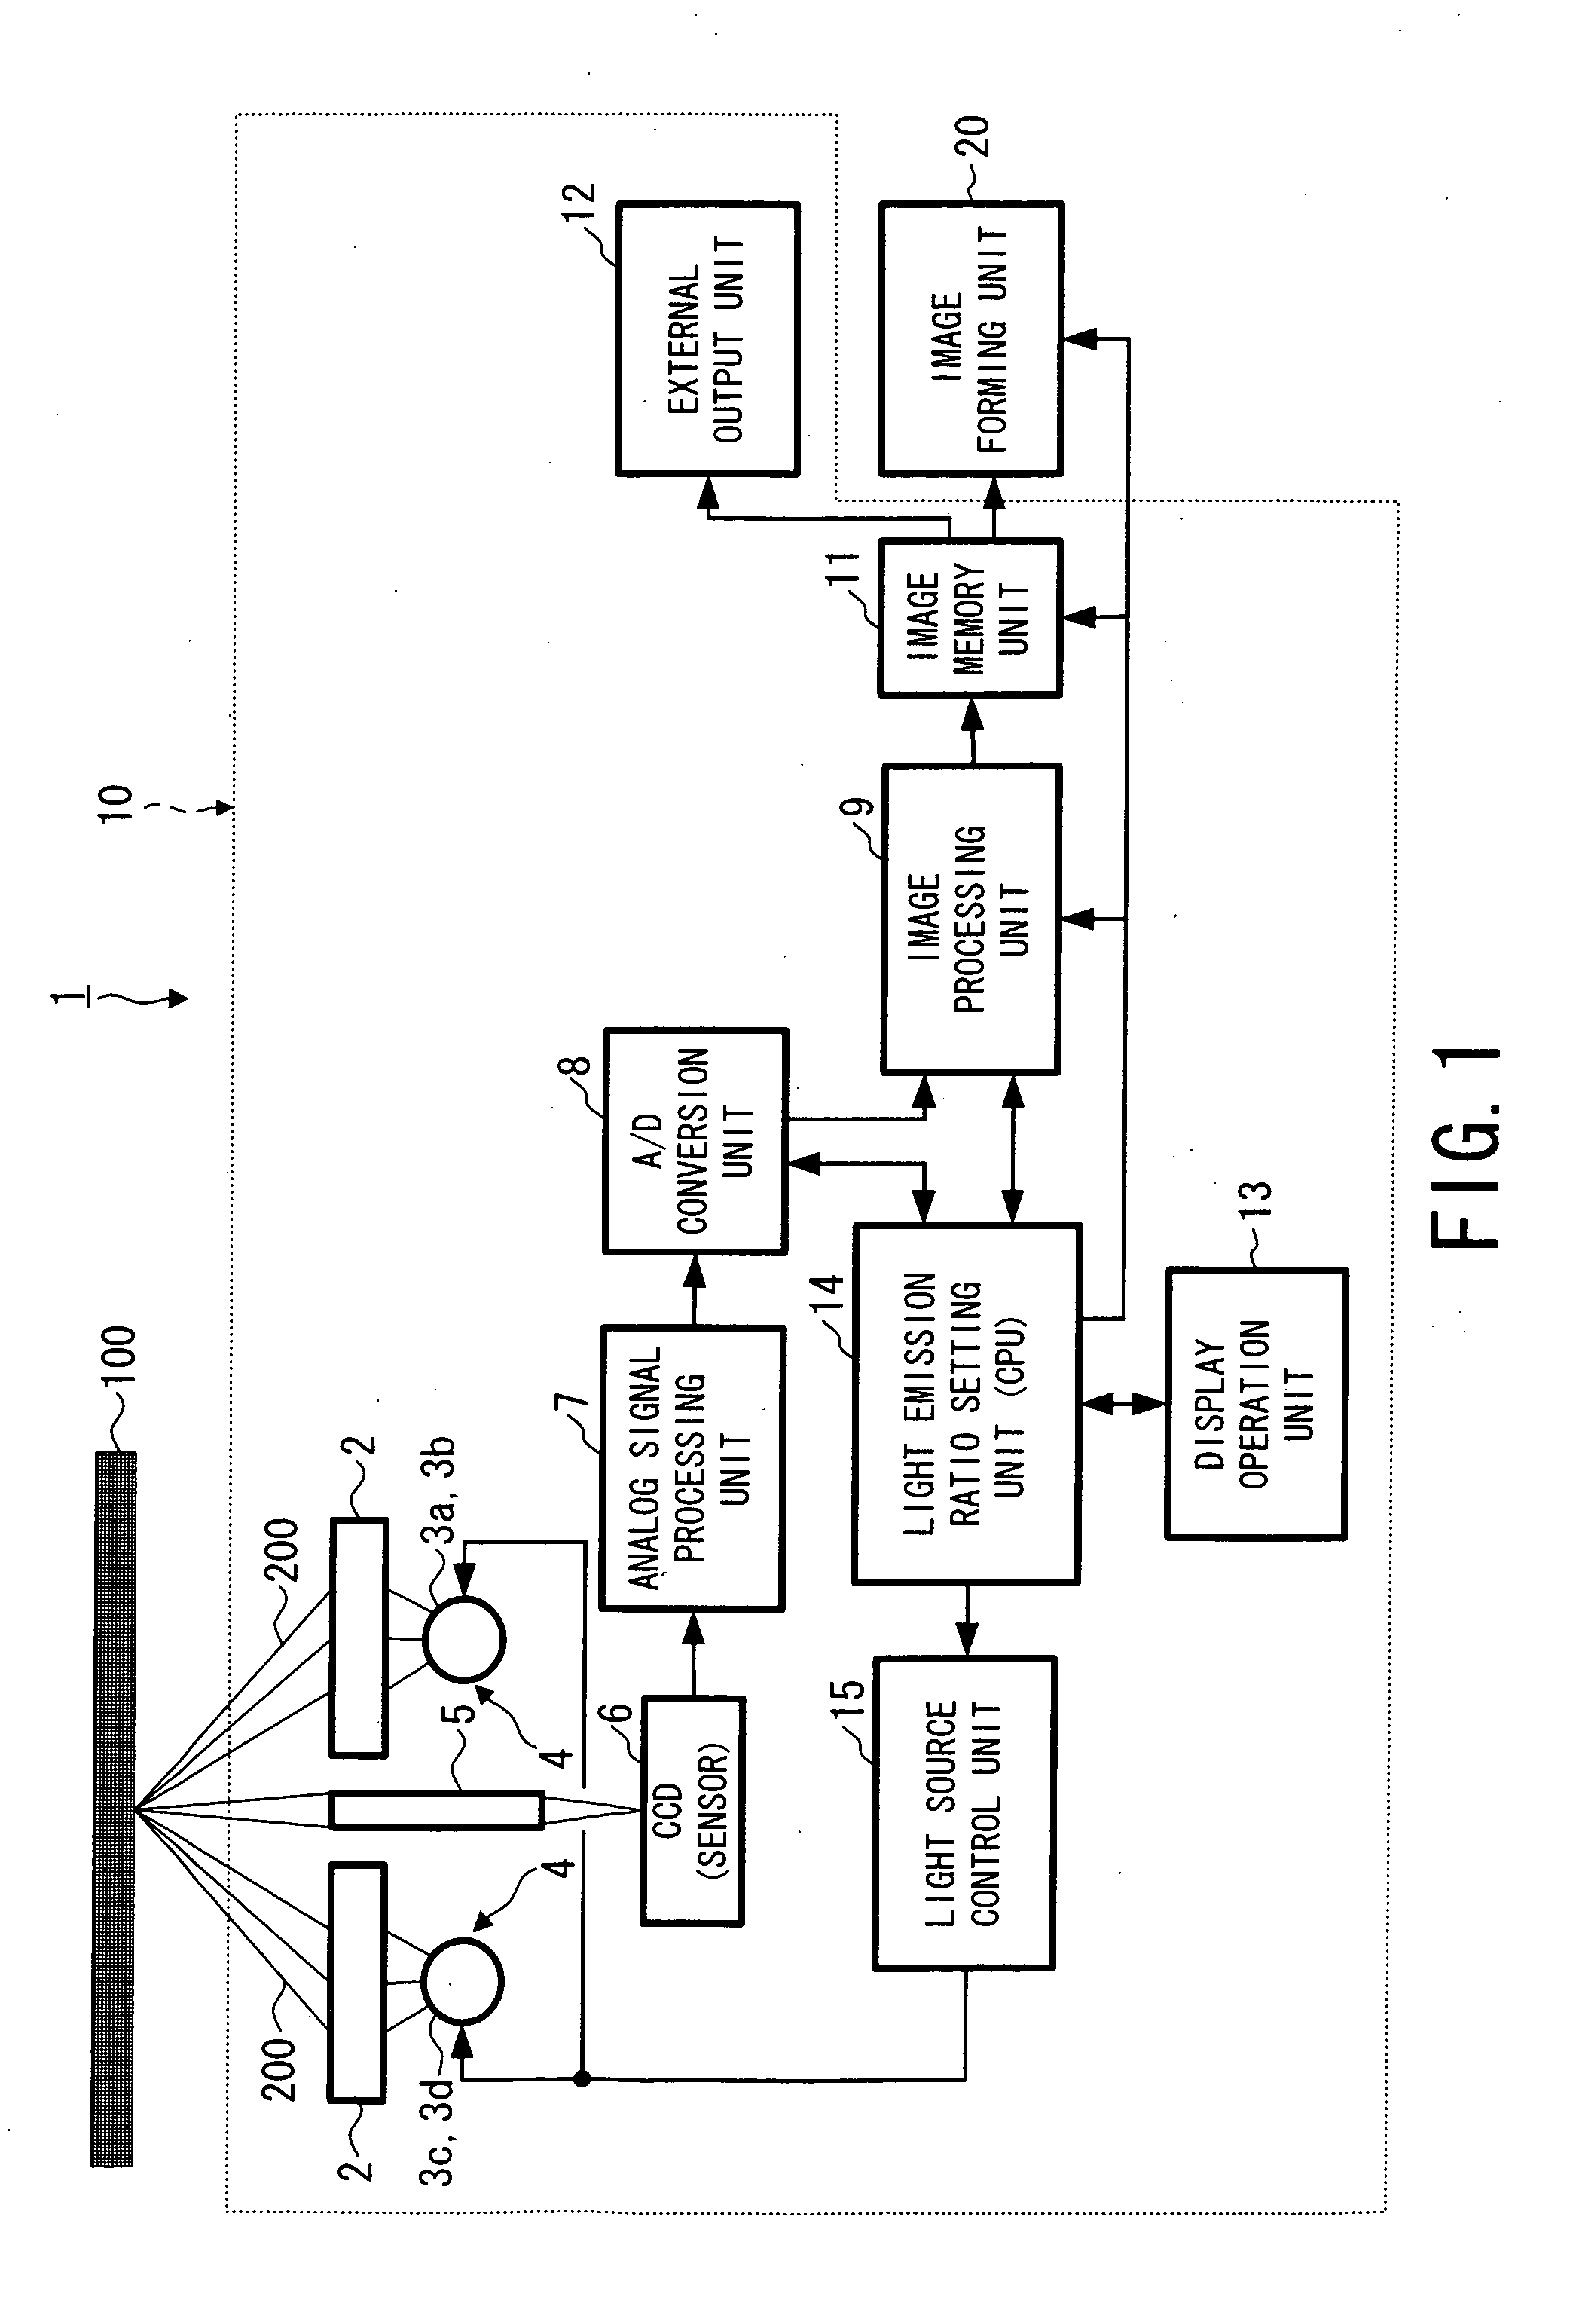 Image reading apparatus, image forming apparatus, and image forming method